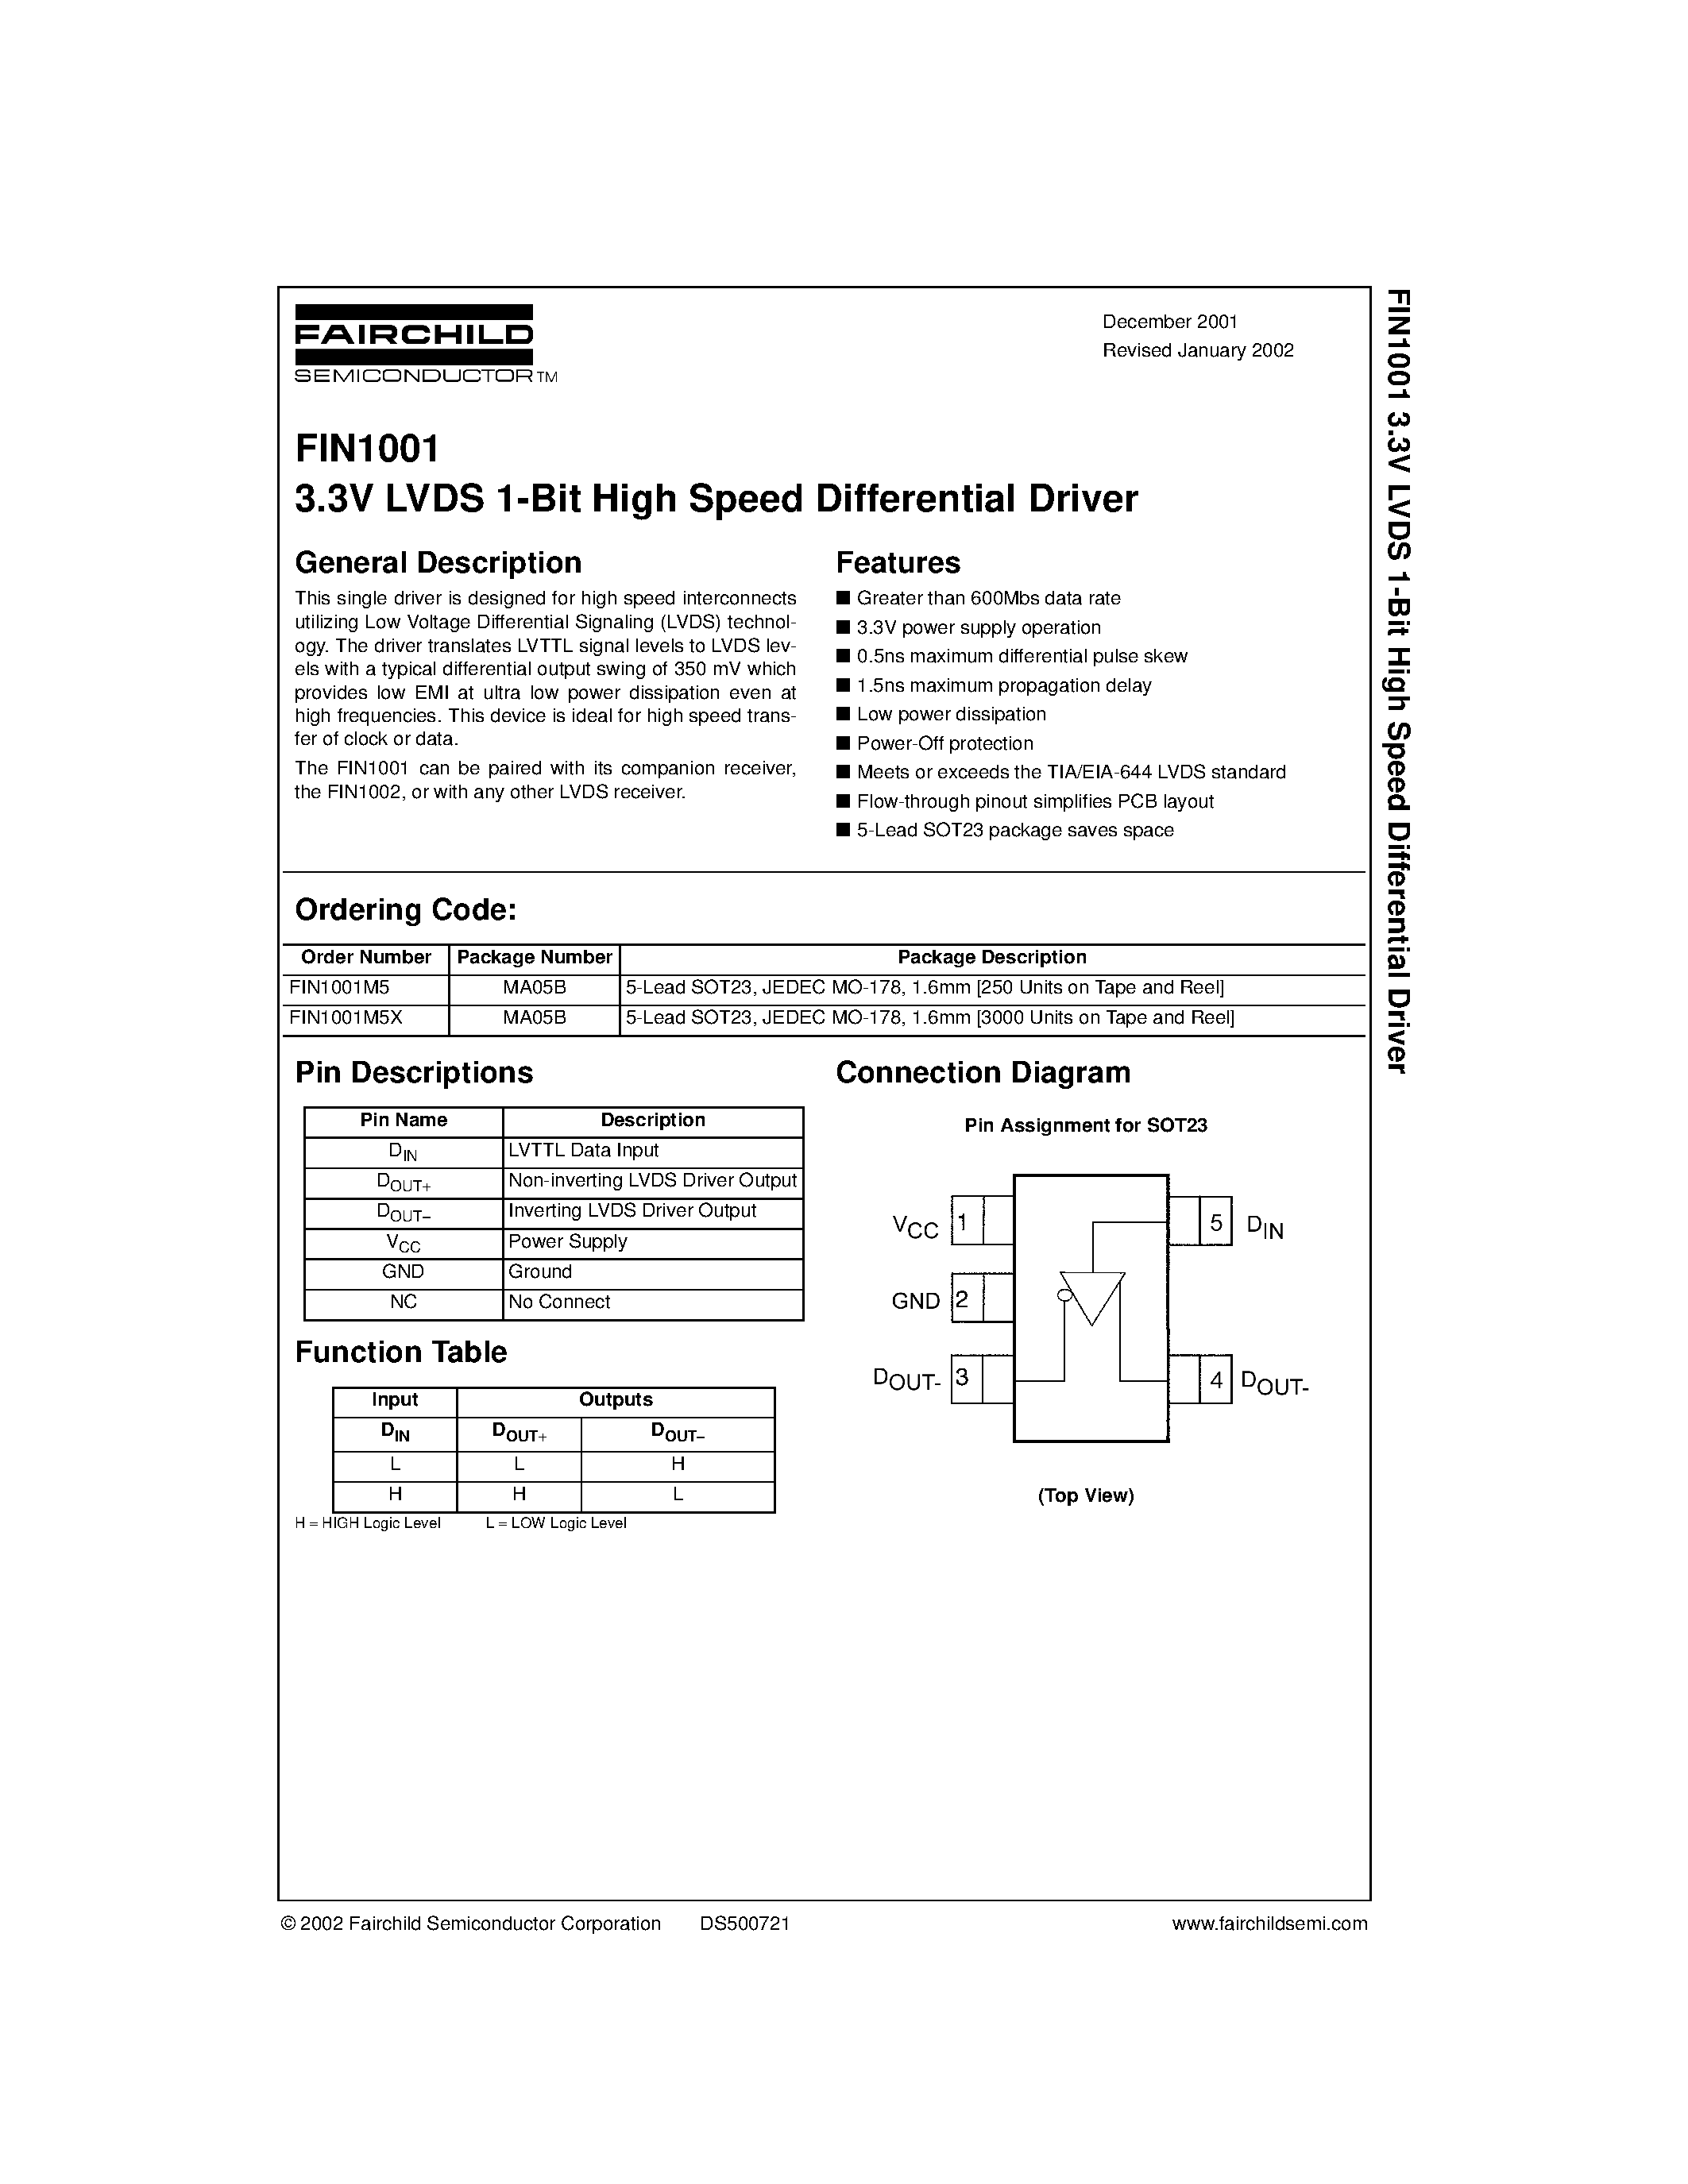 Datasheet FIN1001M5 - 3.3V LVDS 1-Bit High Speed Differential Driver page 1